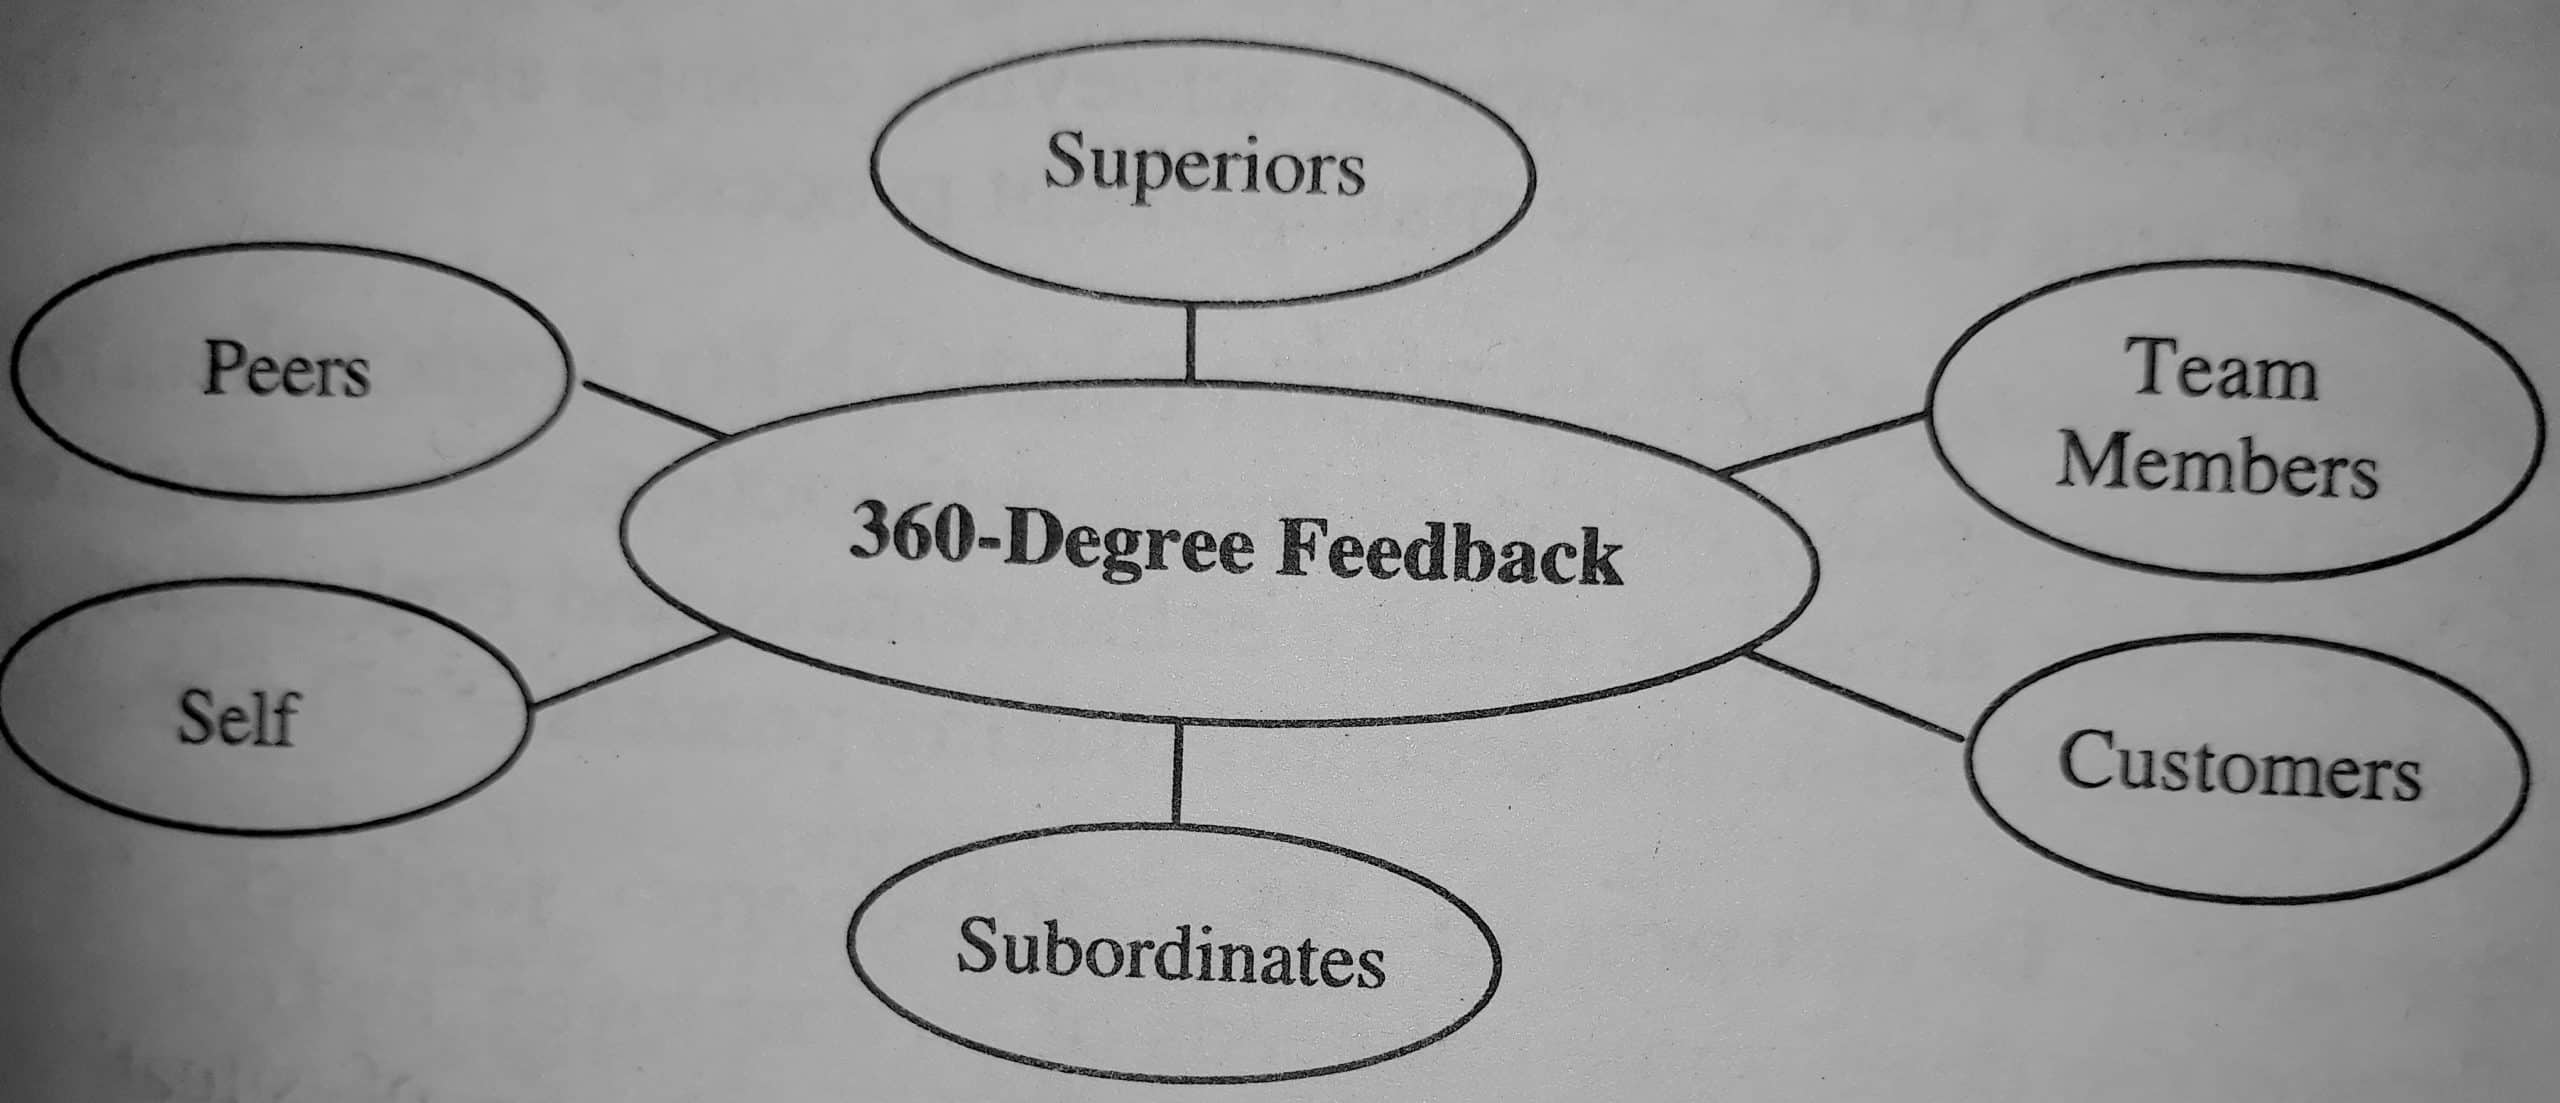 360 Degree Feedback scaled - Meaning and Definition of 360-Degree Feedback